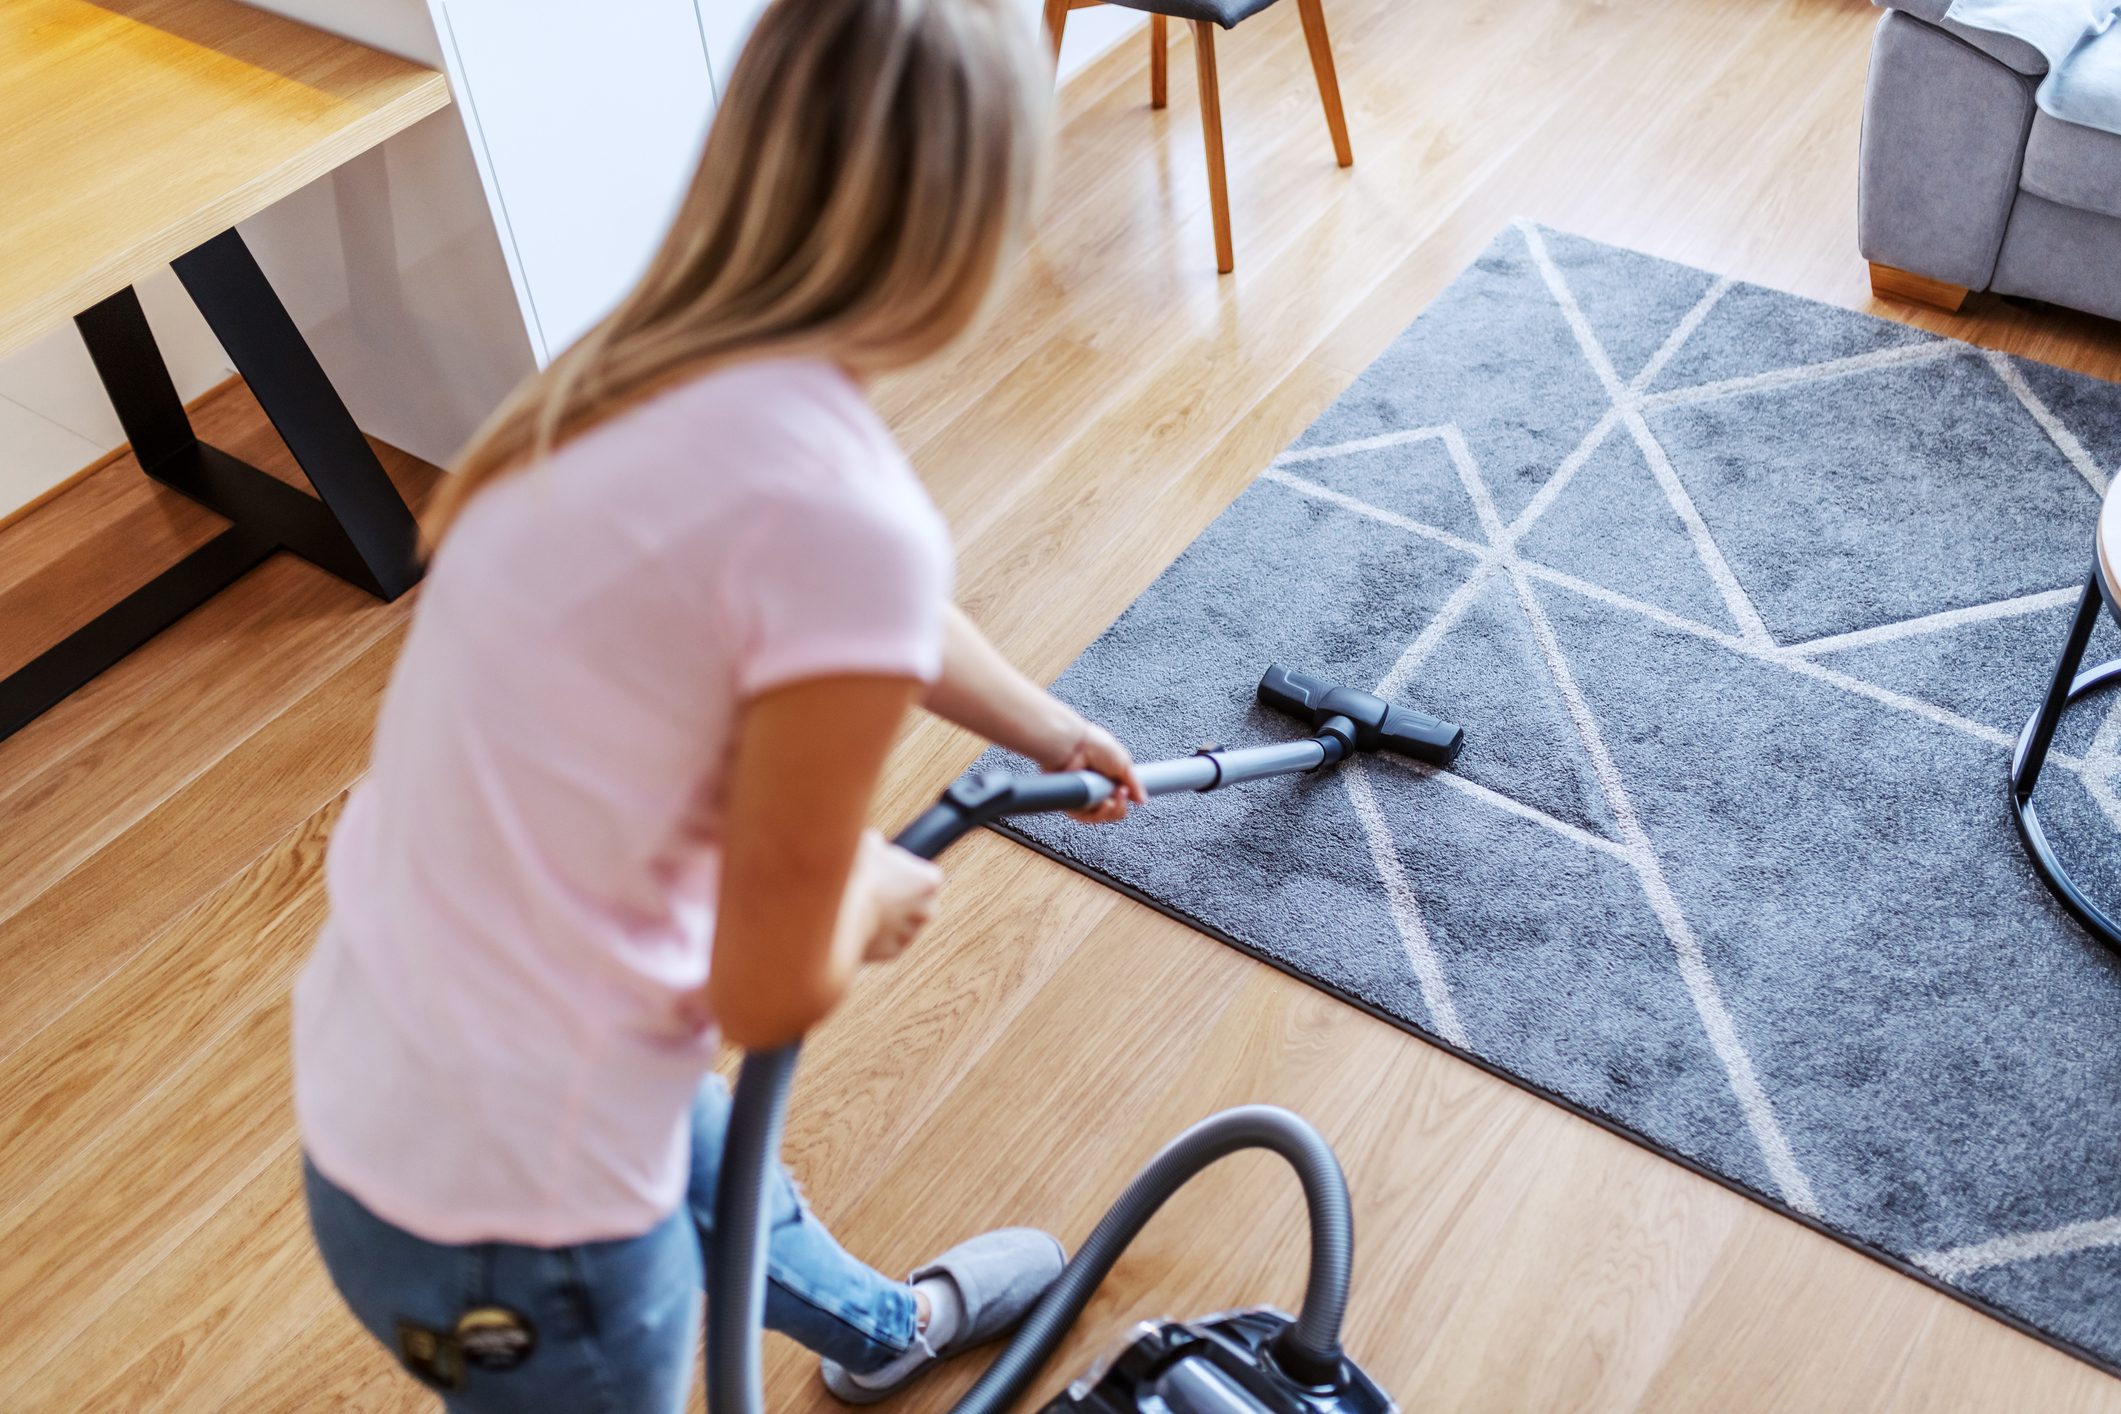 Rear view of woman vacuuming in apartment living room